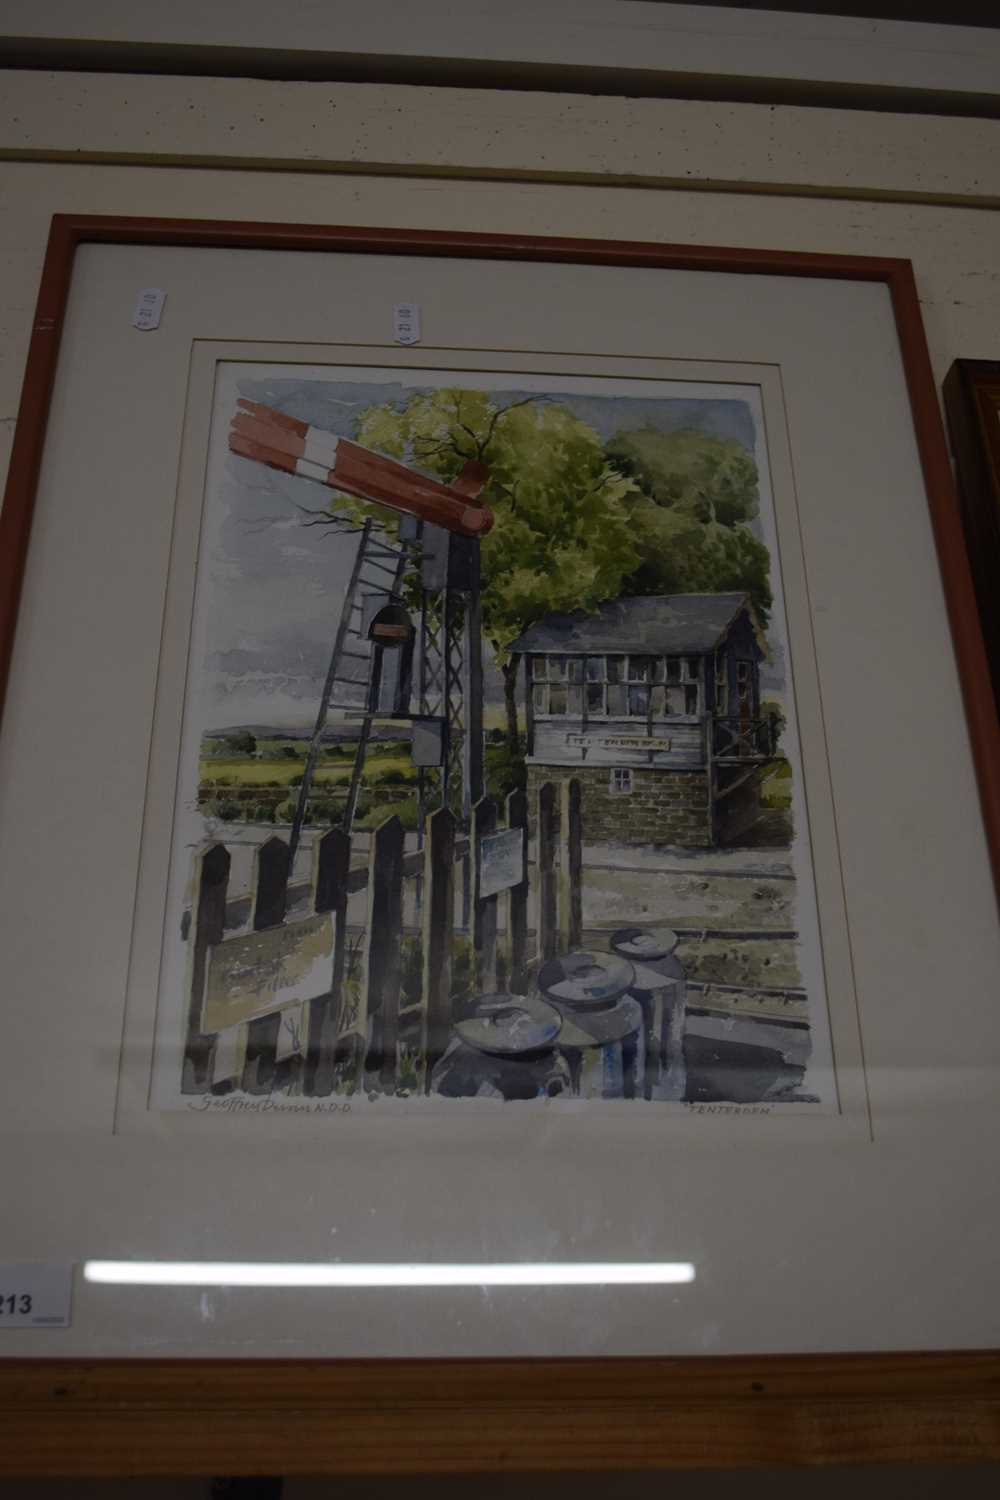 GEOFFREY DUNN, STUDY OF SIGNALS AT TENTERDEN, SIGNED IN PENCIL, F/G